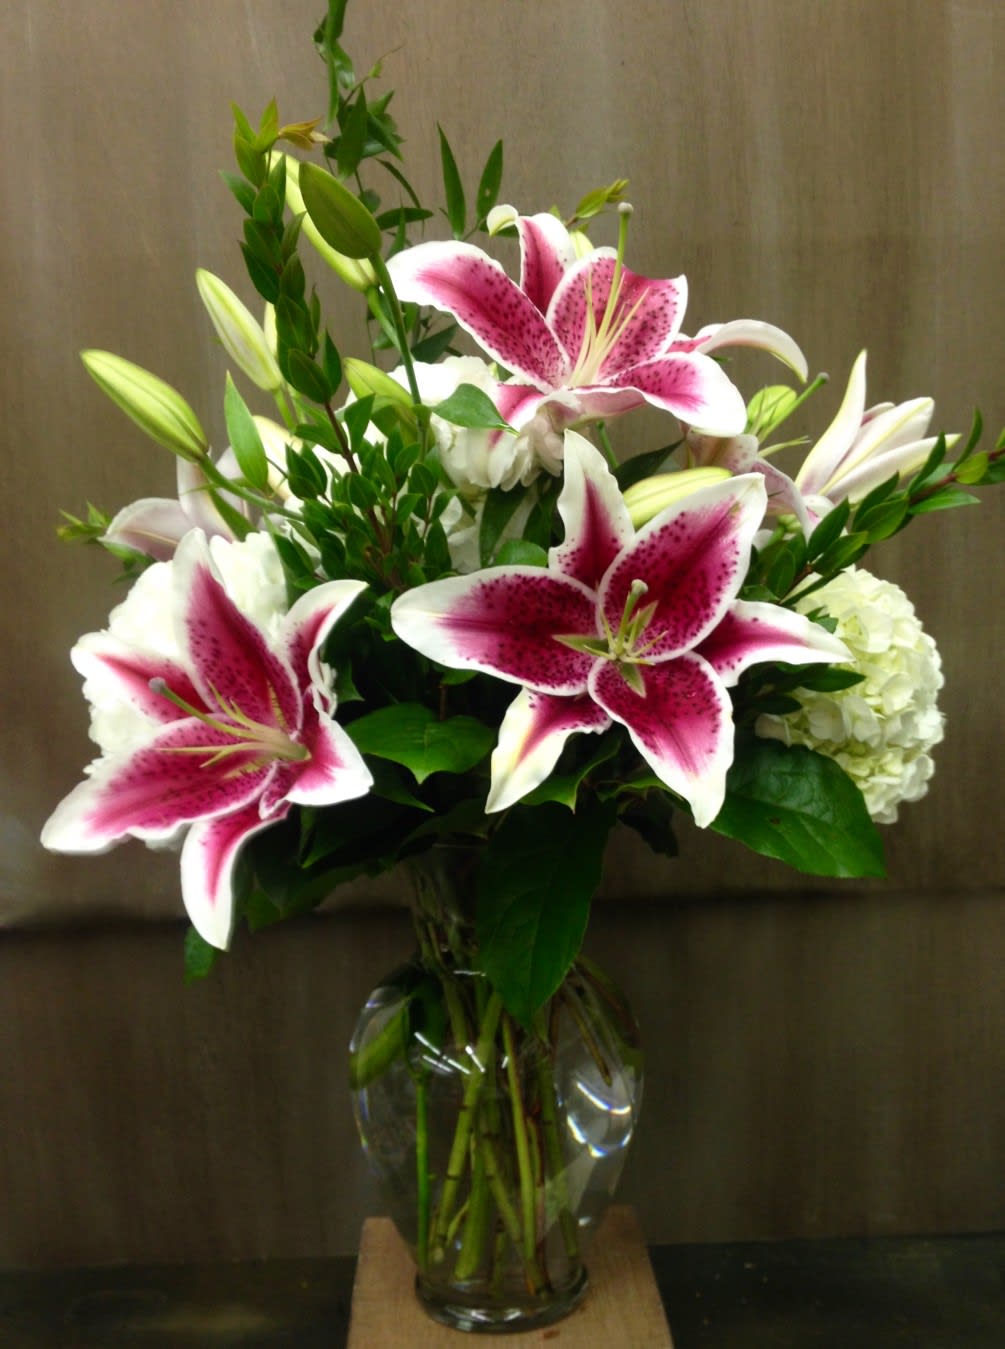 STARGAZER LILY  BOQUET   NEW-A105 - Our STARGAZER LILY  BOUQUET is a fragrant combination of Stargazer Oriental Lilies  and white hydrangeas in a quality glass vase.. This Lily arrangement makes a dramatic presentation and is appropriate for most any occasion.   